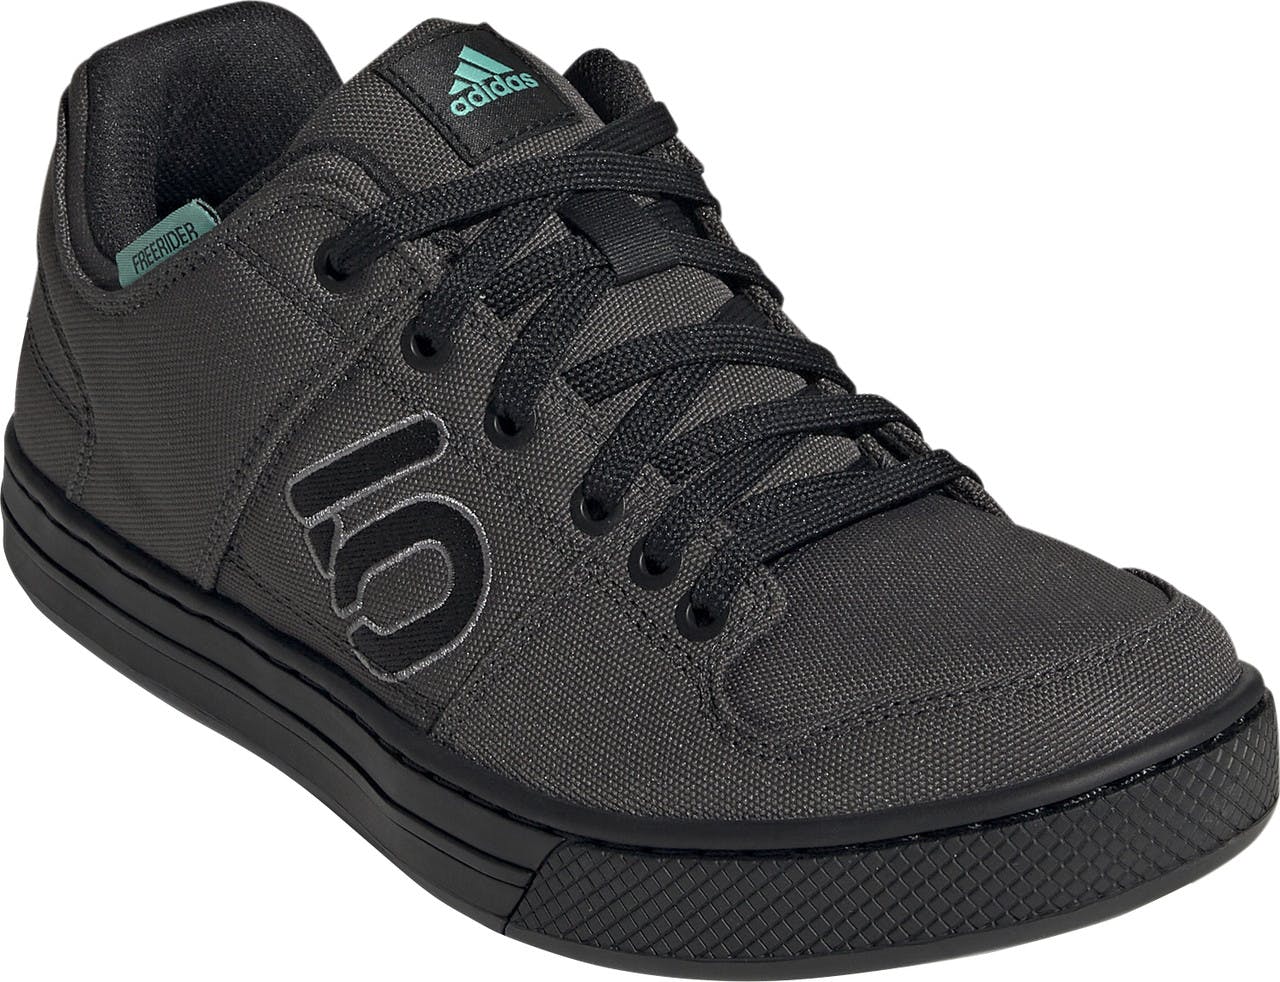 Freerider Canvas Cycling Shoes DGH Solid Grey/Core Black